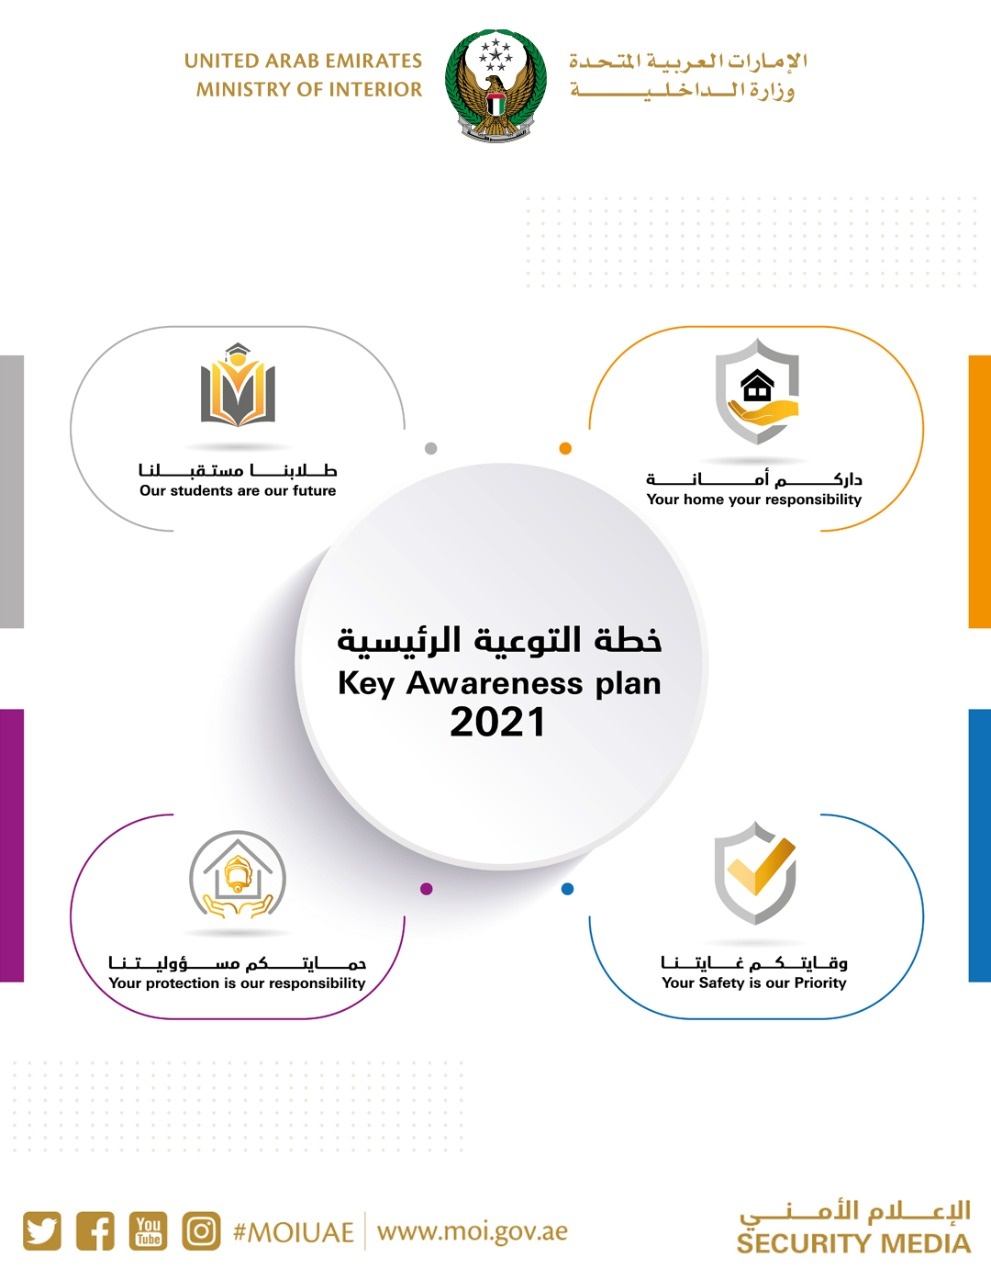 4 major awareness campaigns rolled out by "Civil Defense" as part of 2021 awareness plan